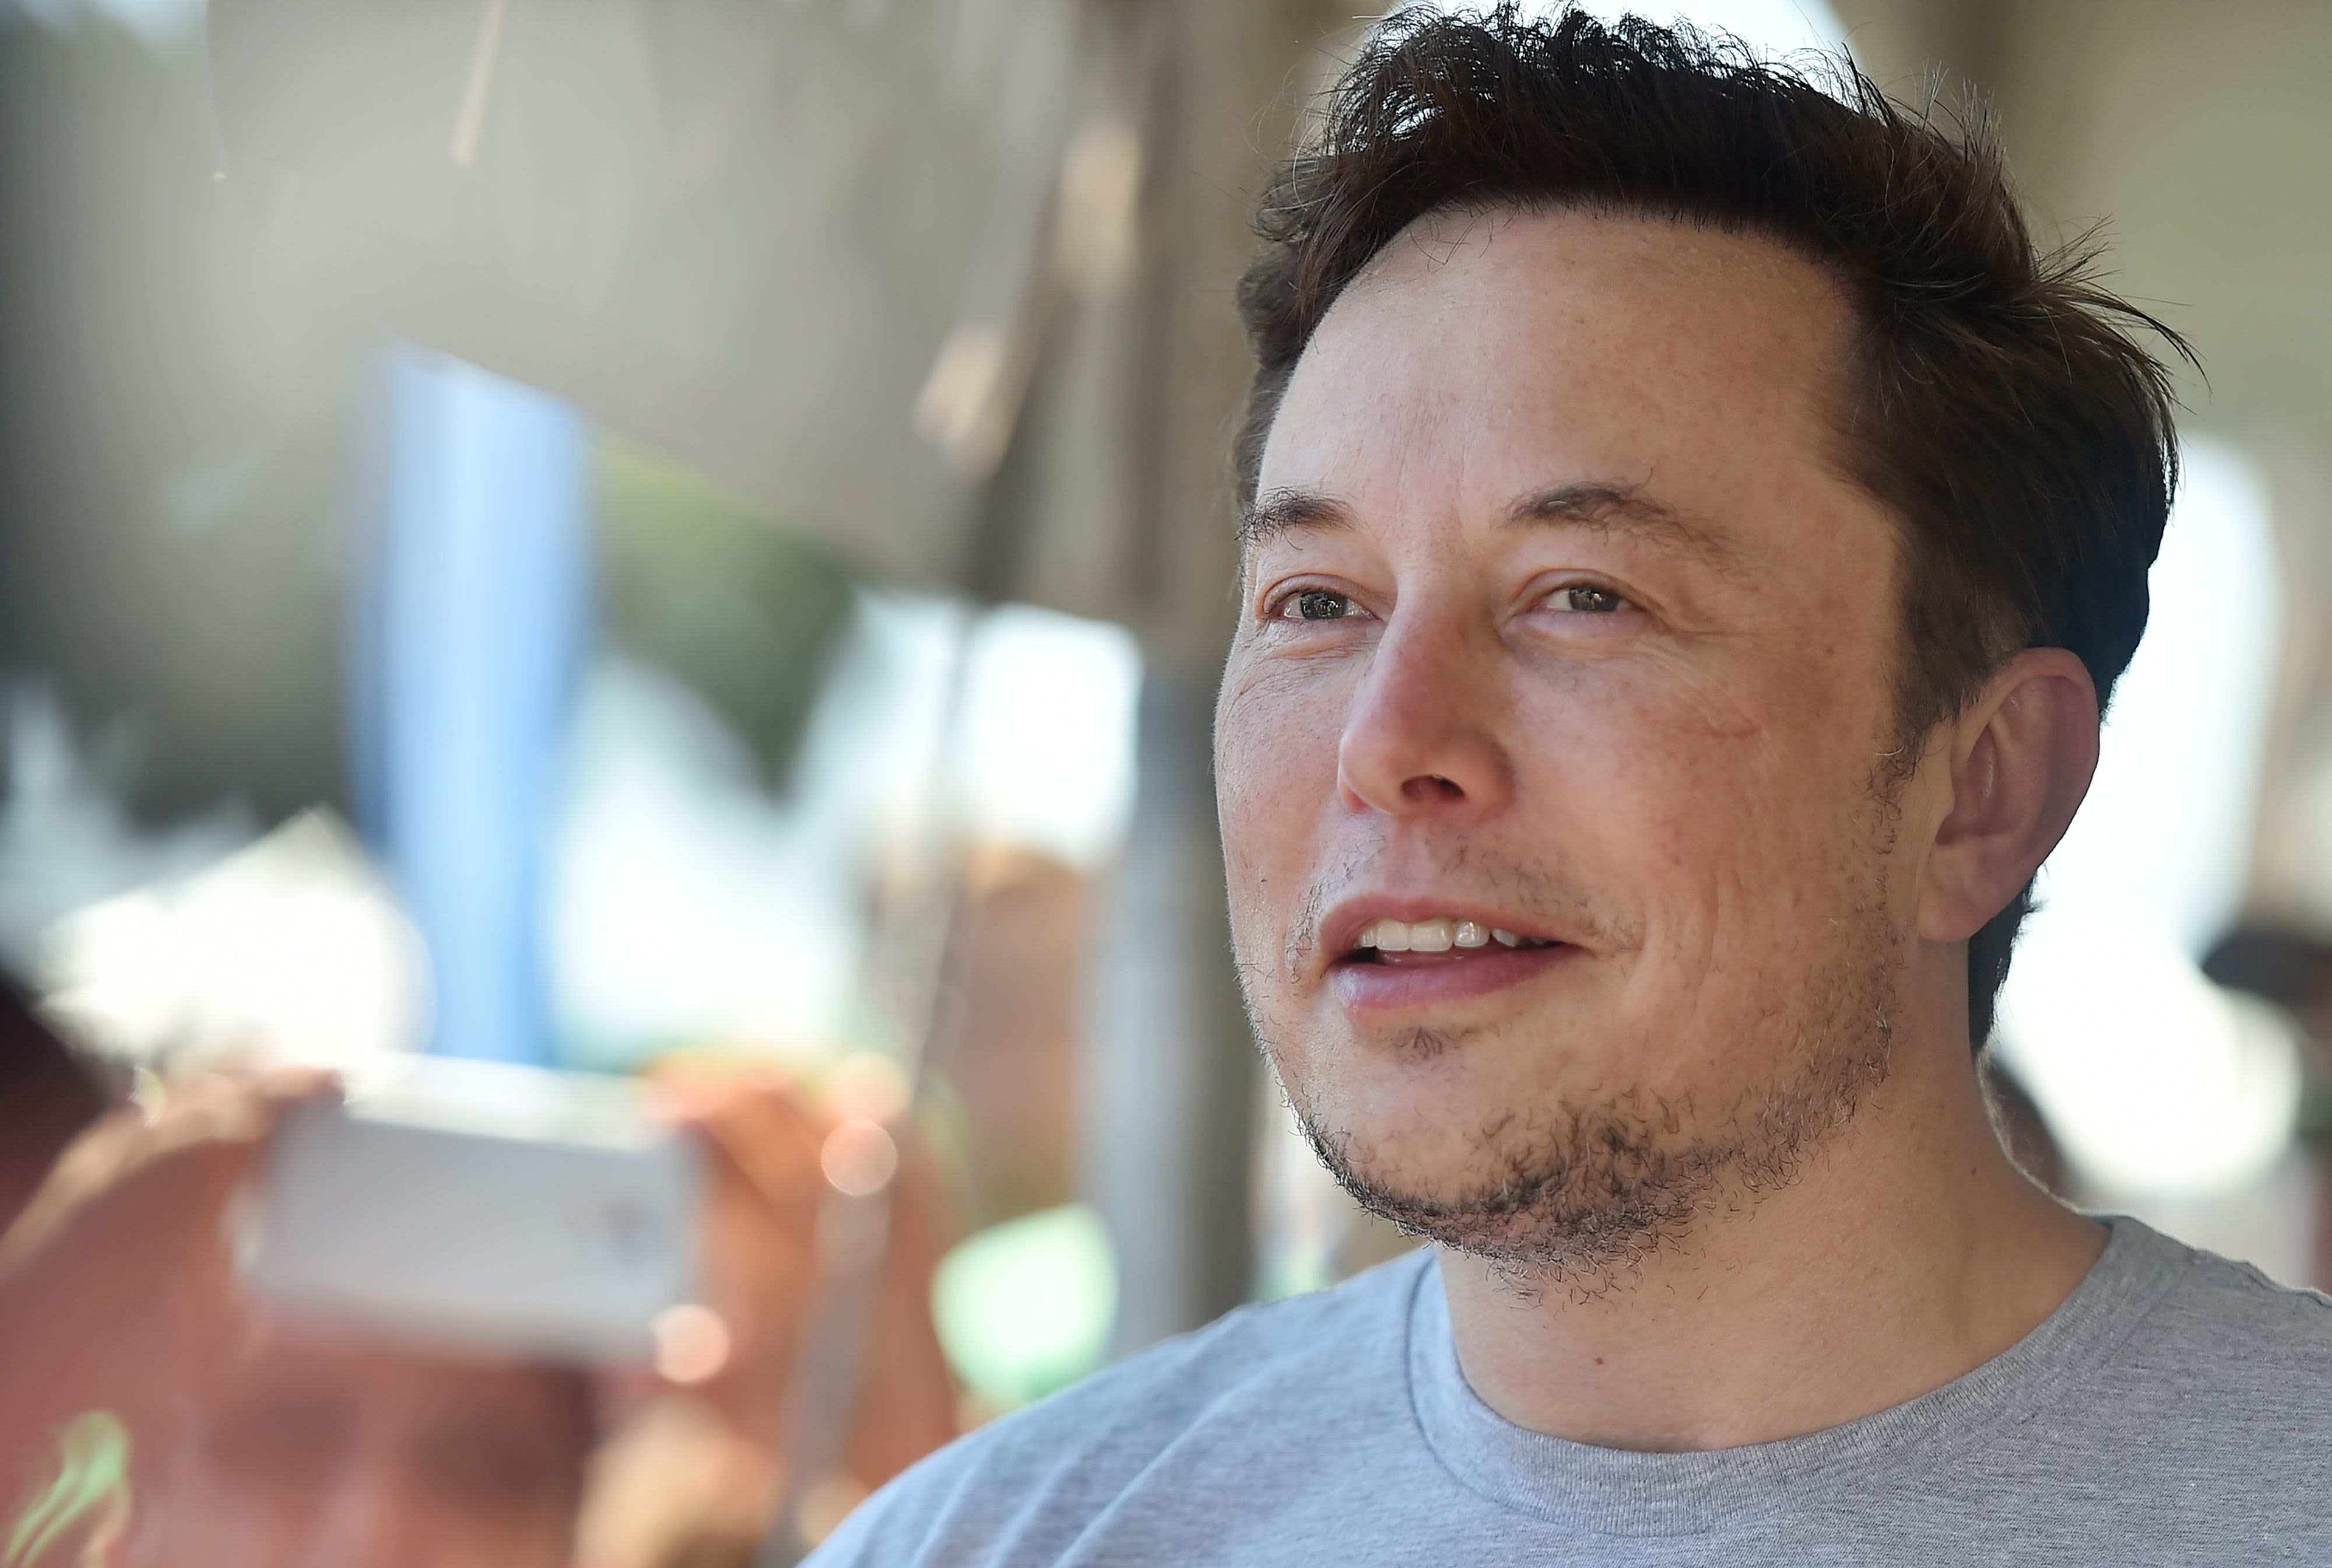 Teslas Elon Musk Surprising facts about his youth picture